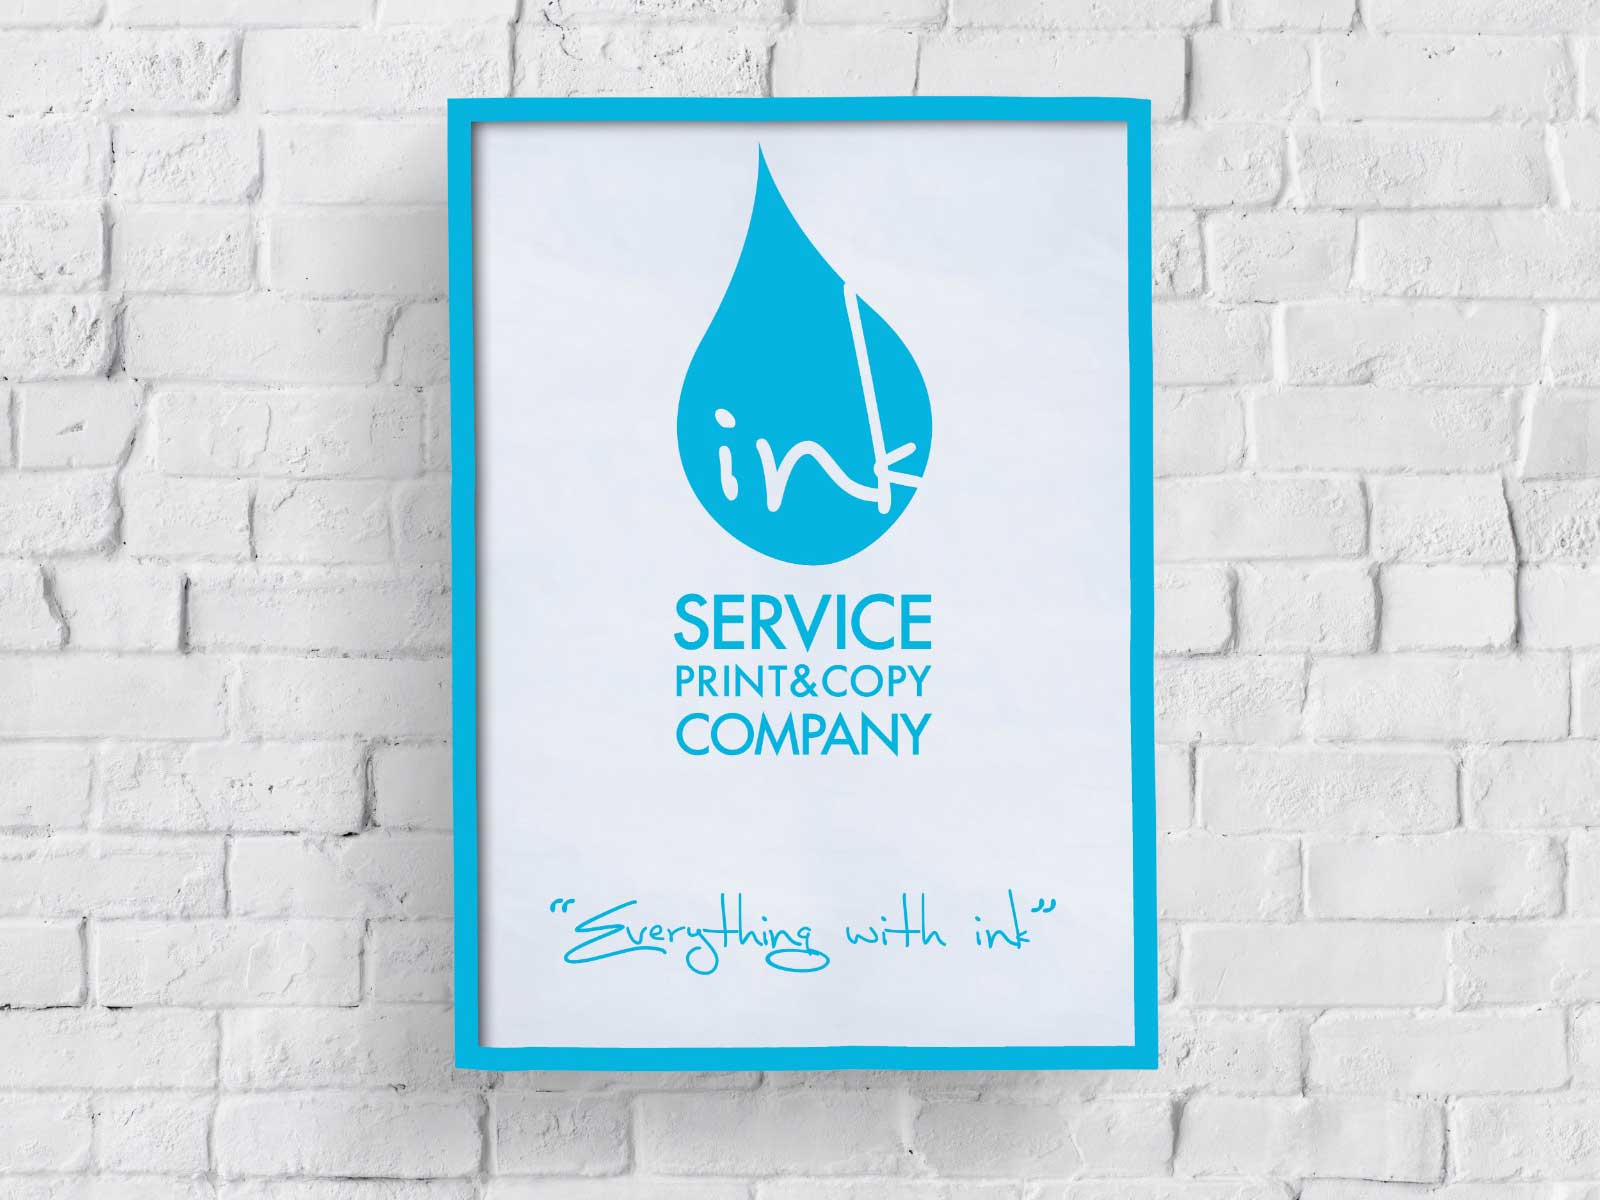 inkservice prints on wall posters for indoor and outdoor use Vinyl - banner printing